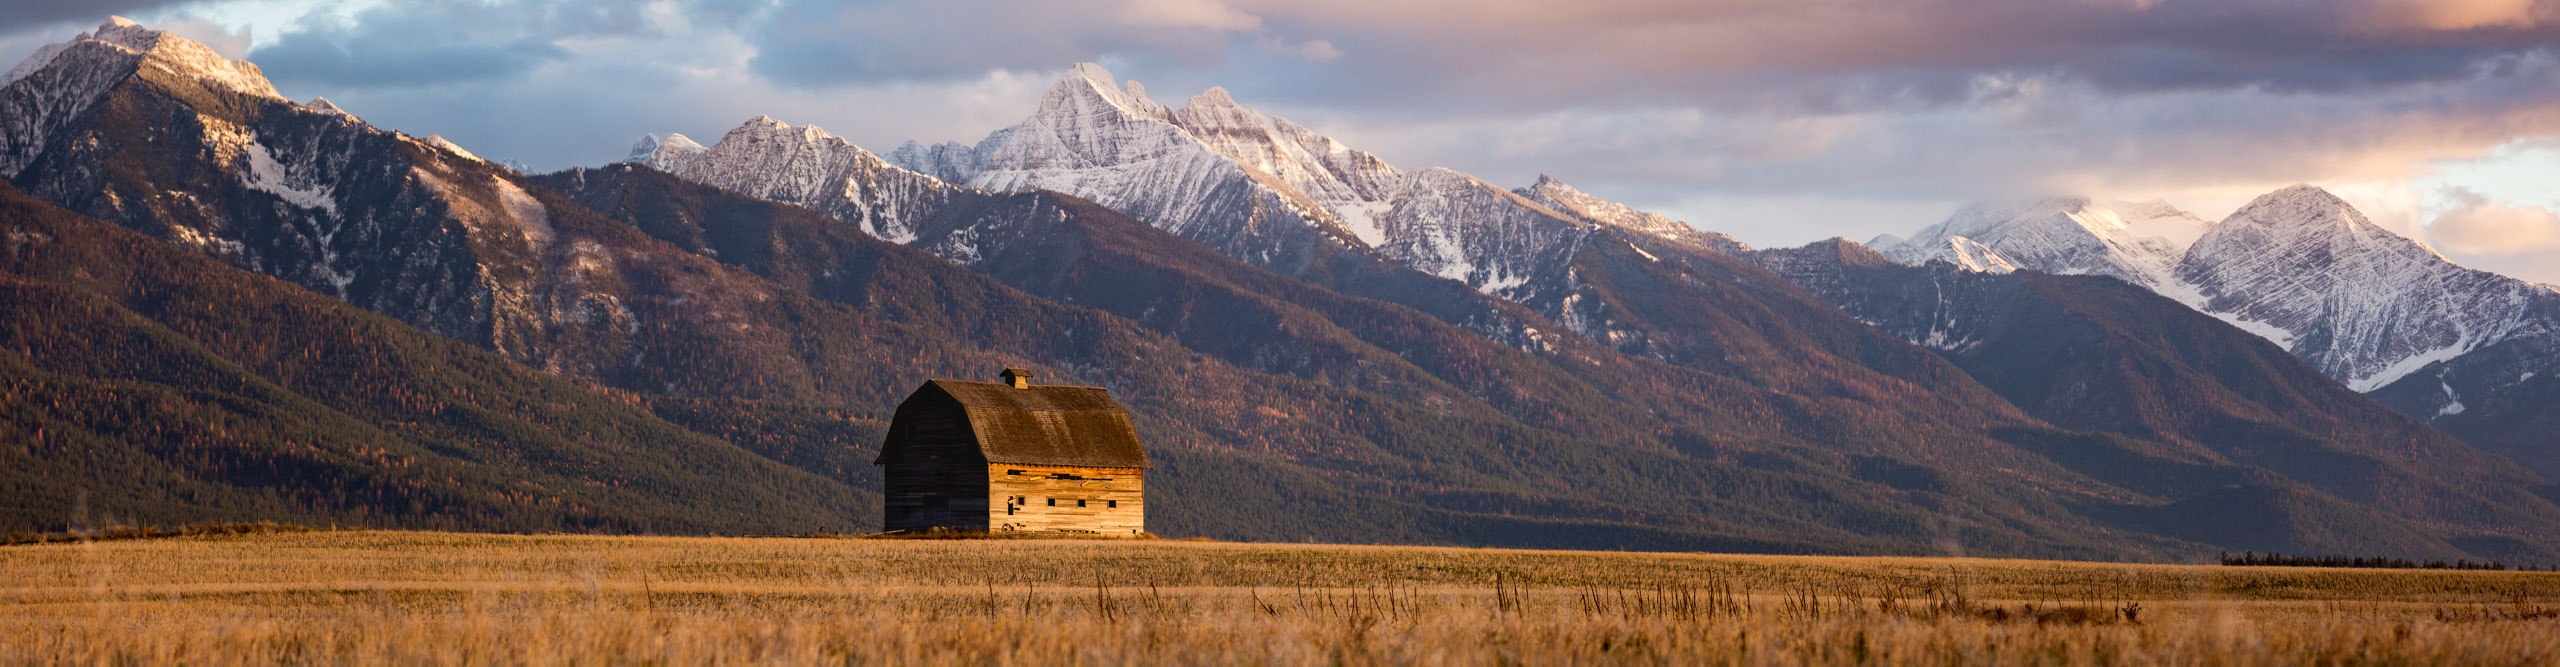 Barn in field with snow topped mountains in the distance, as the sun goes down, Pablo, Montana, USA